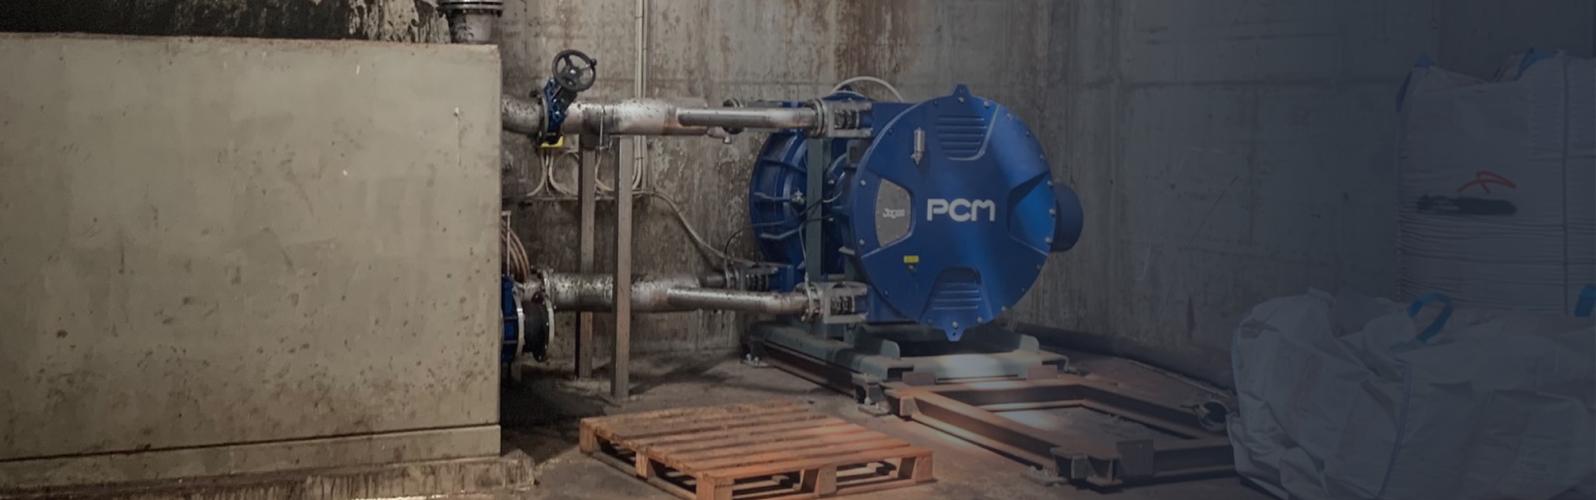 PCM your provider of pumps and systems for the industry - PCM Delasco™ DX